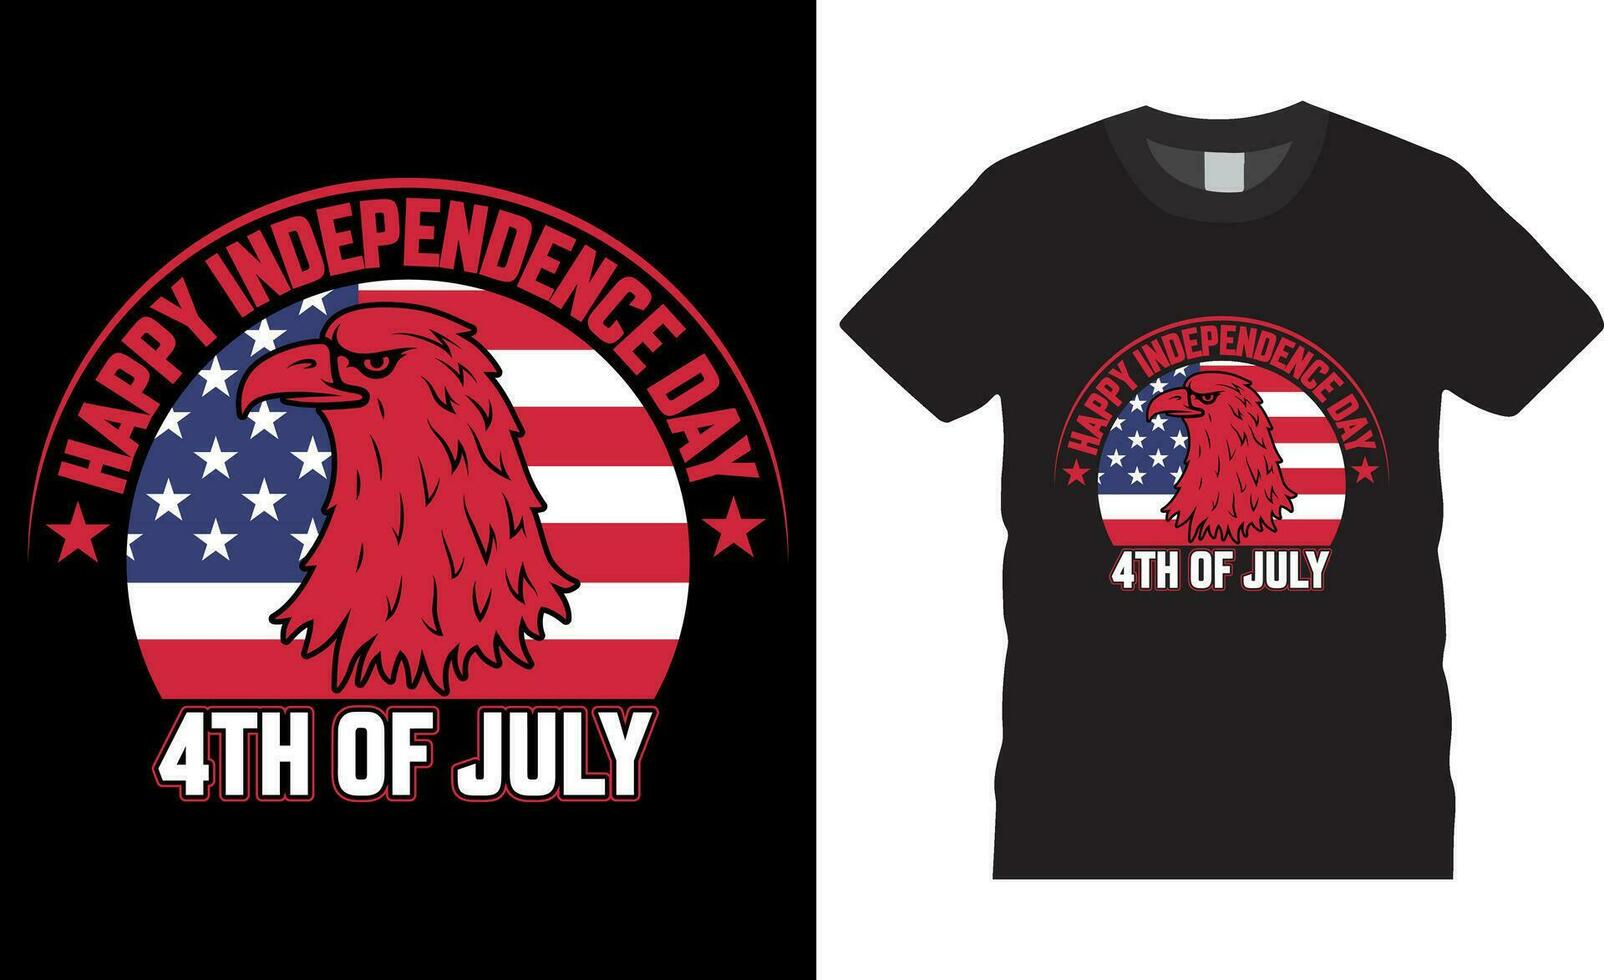 Happy Independence Day 4th of July t shirt design vector template. Happy Independence Day 4th of July